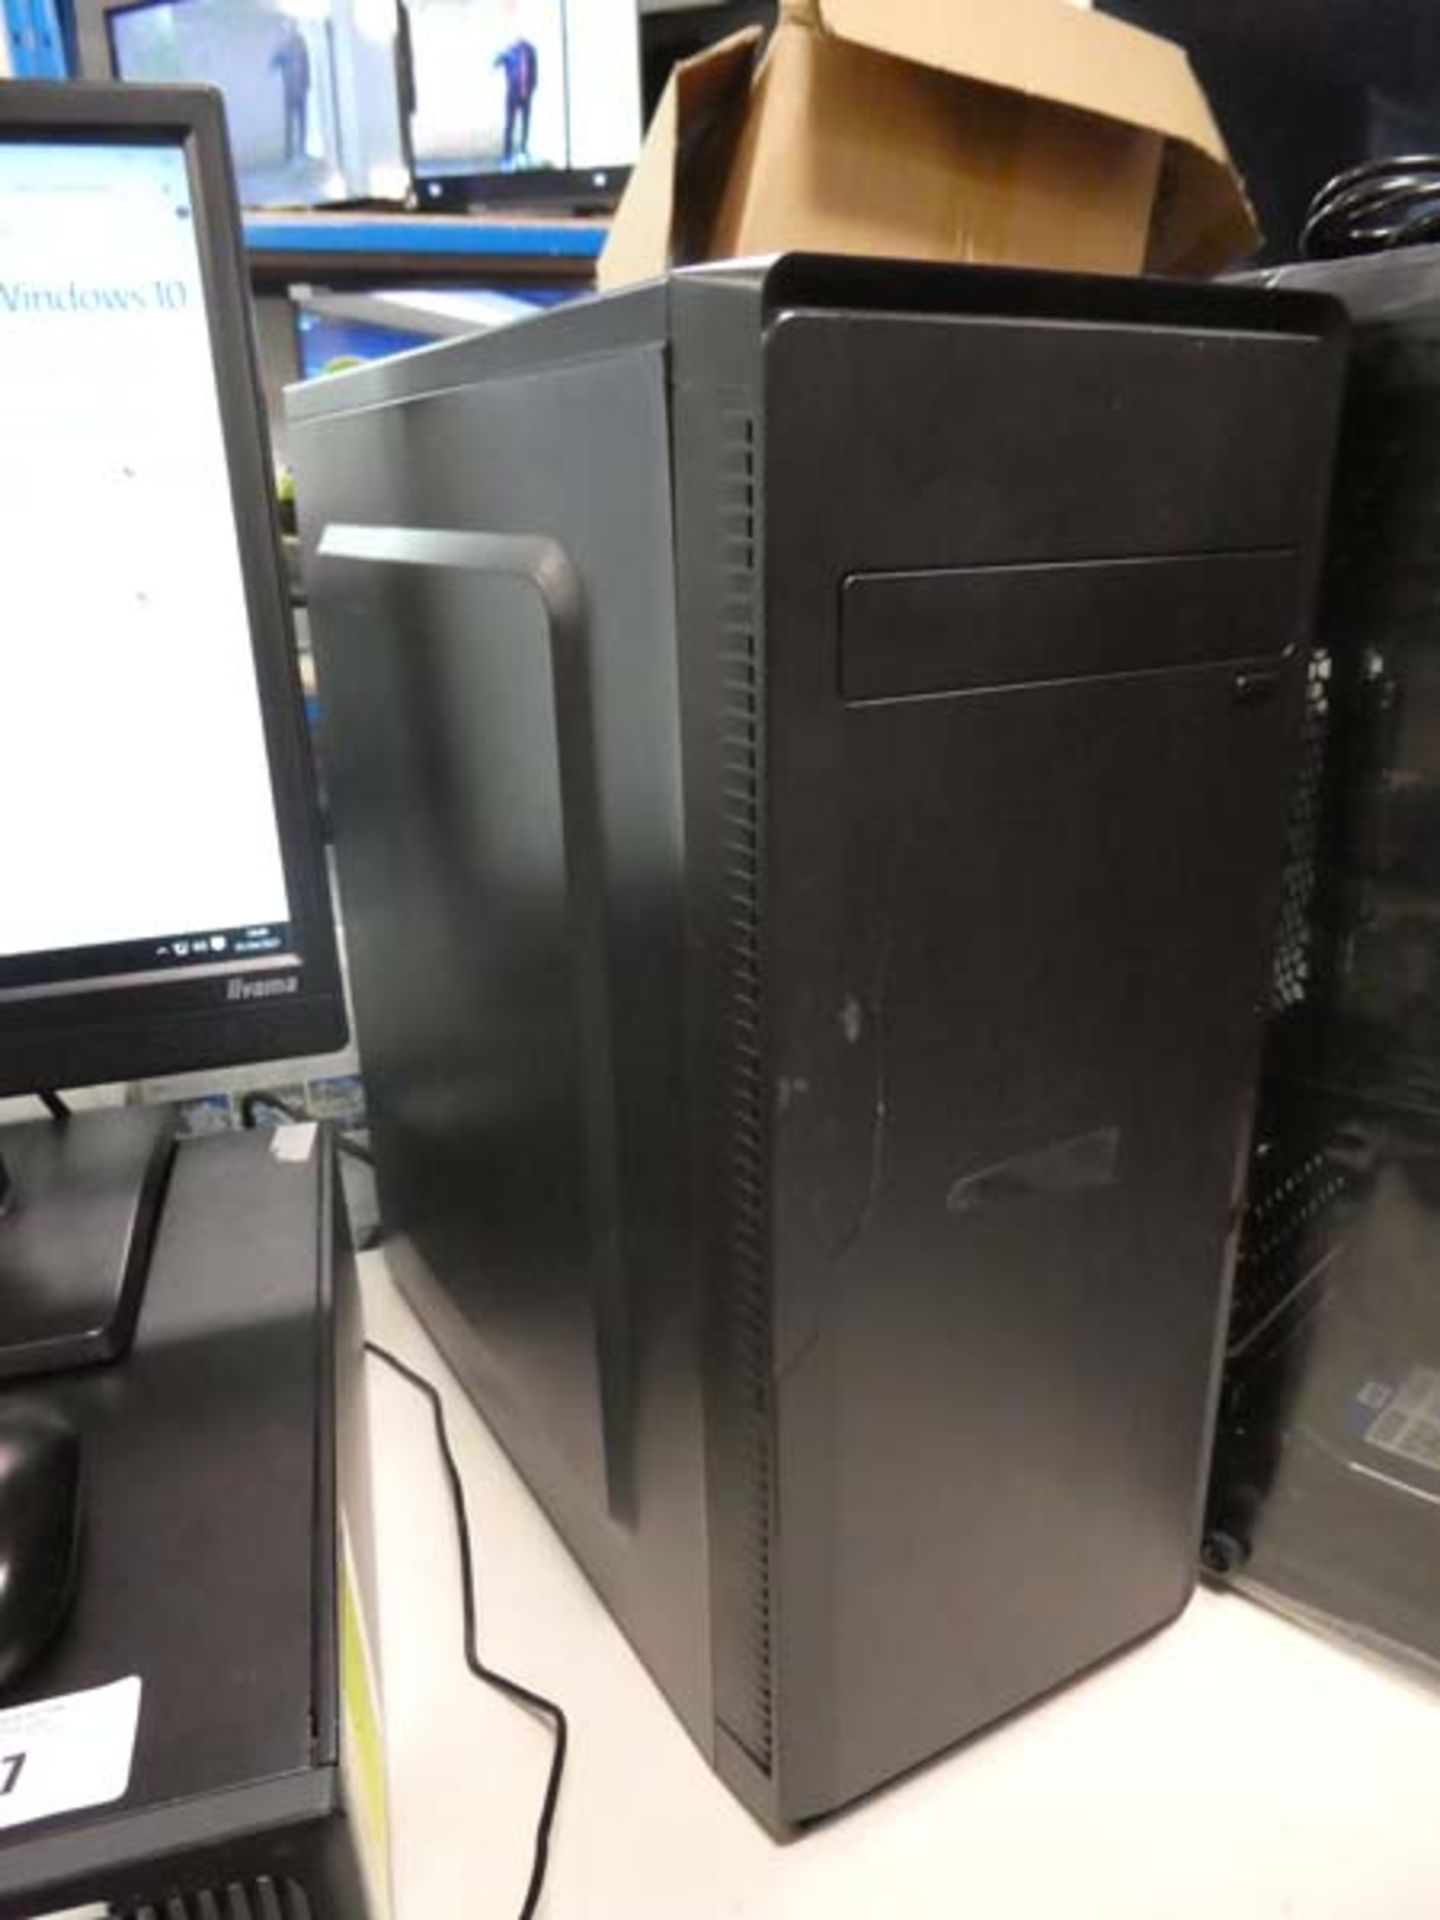 Desktop computer with damaged case (no hdd, sold for parts)